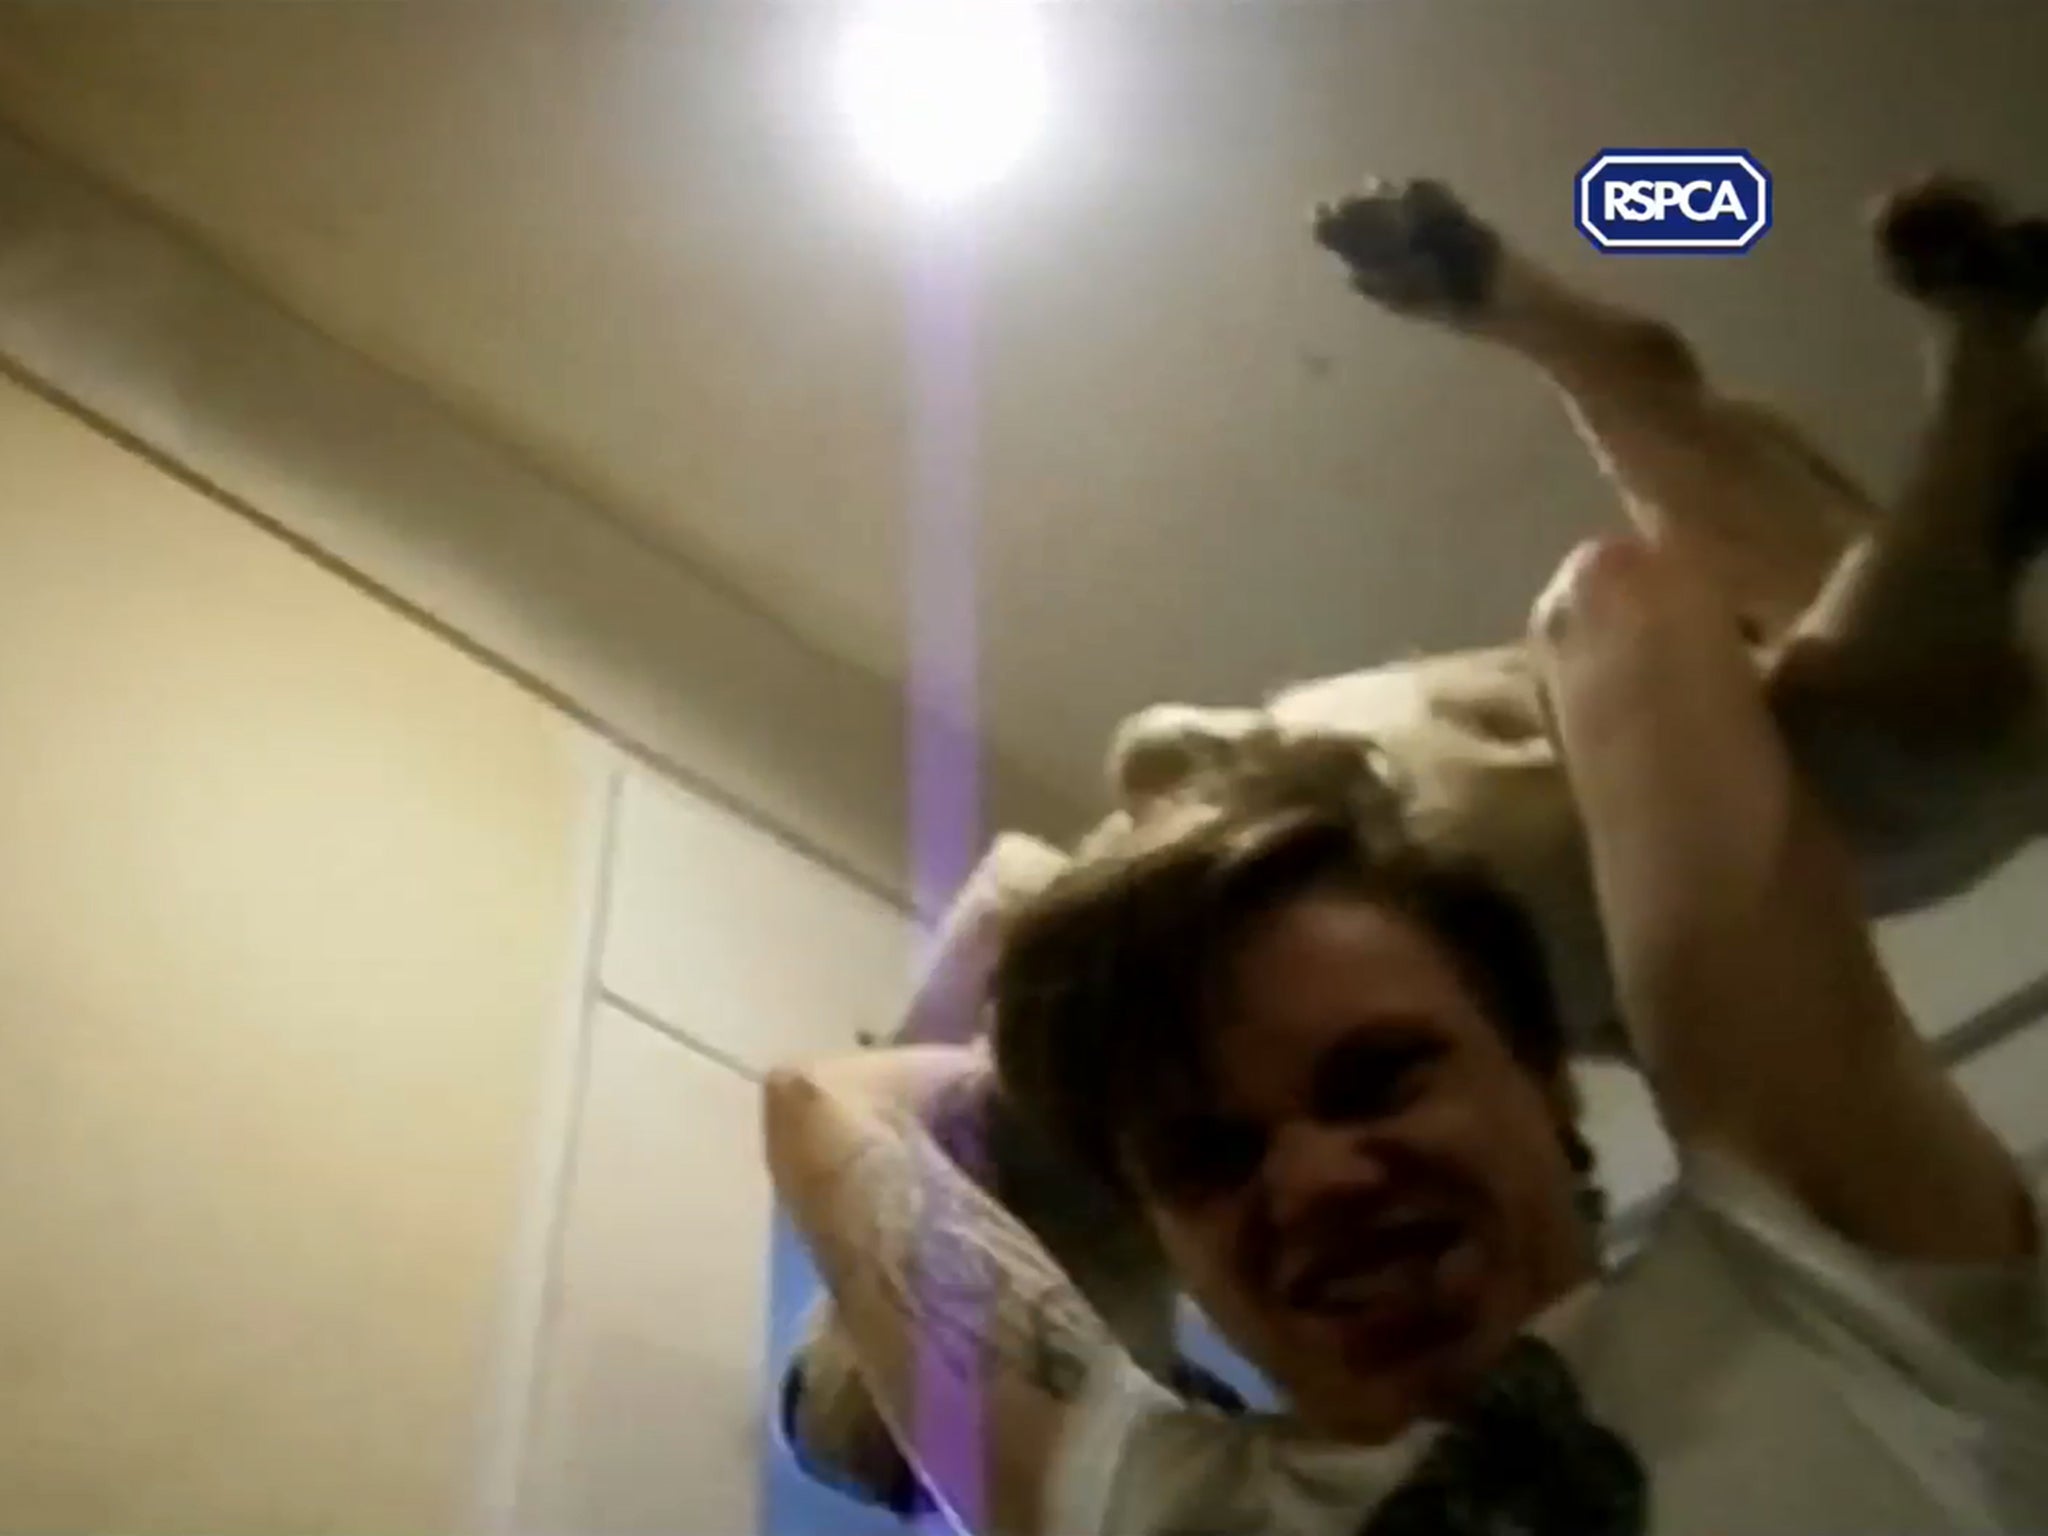 Footage released by the RSPCA shows Andrew Frankish throwing the family's pet Bulldog down the stairs